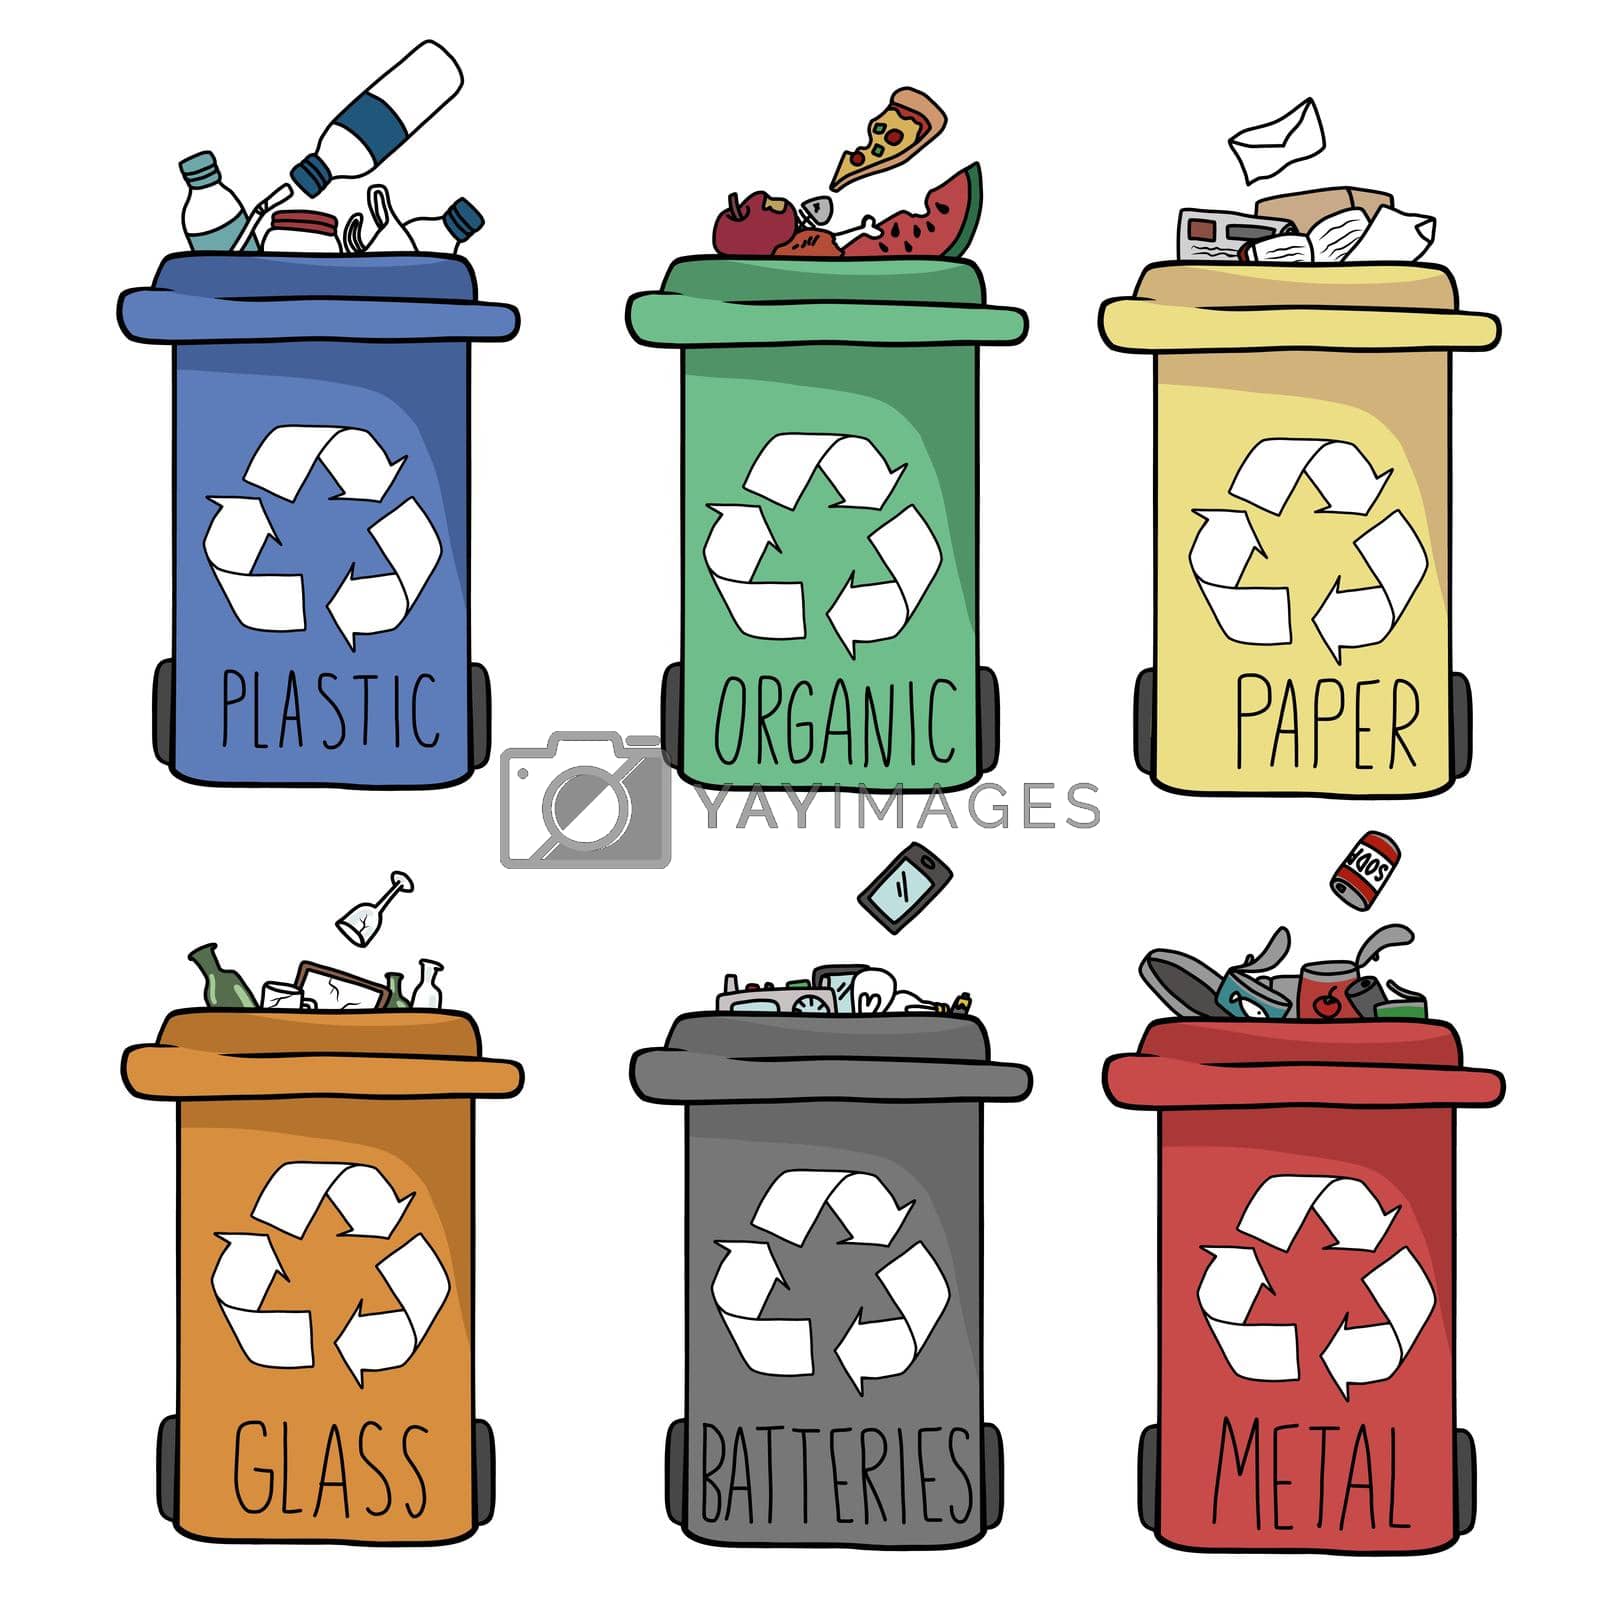 Royalty free image of Different of garbage bins types for recycling info graphic vector illustration by Yoopho